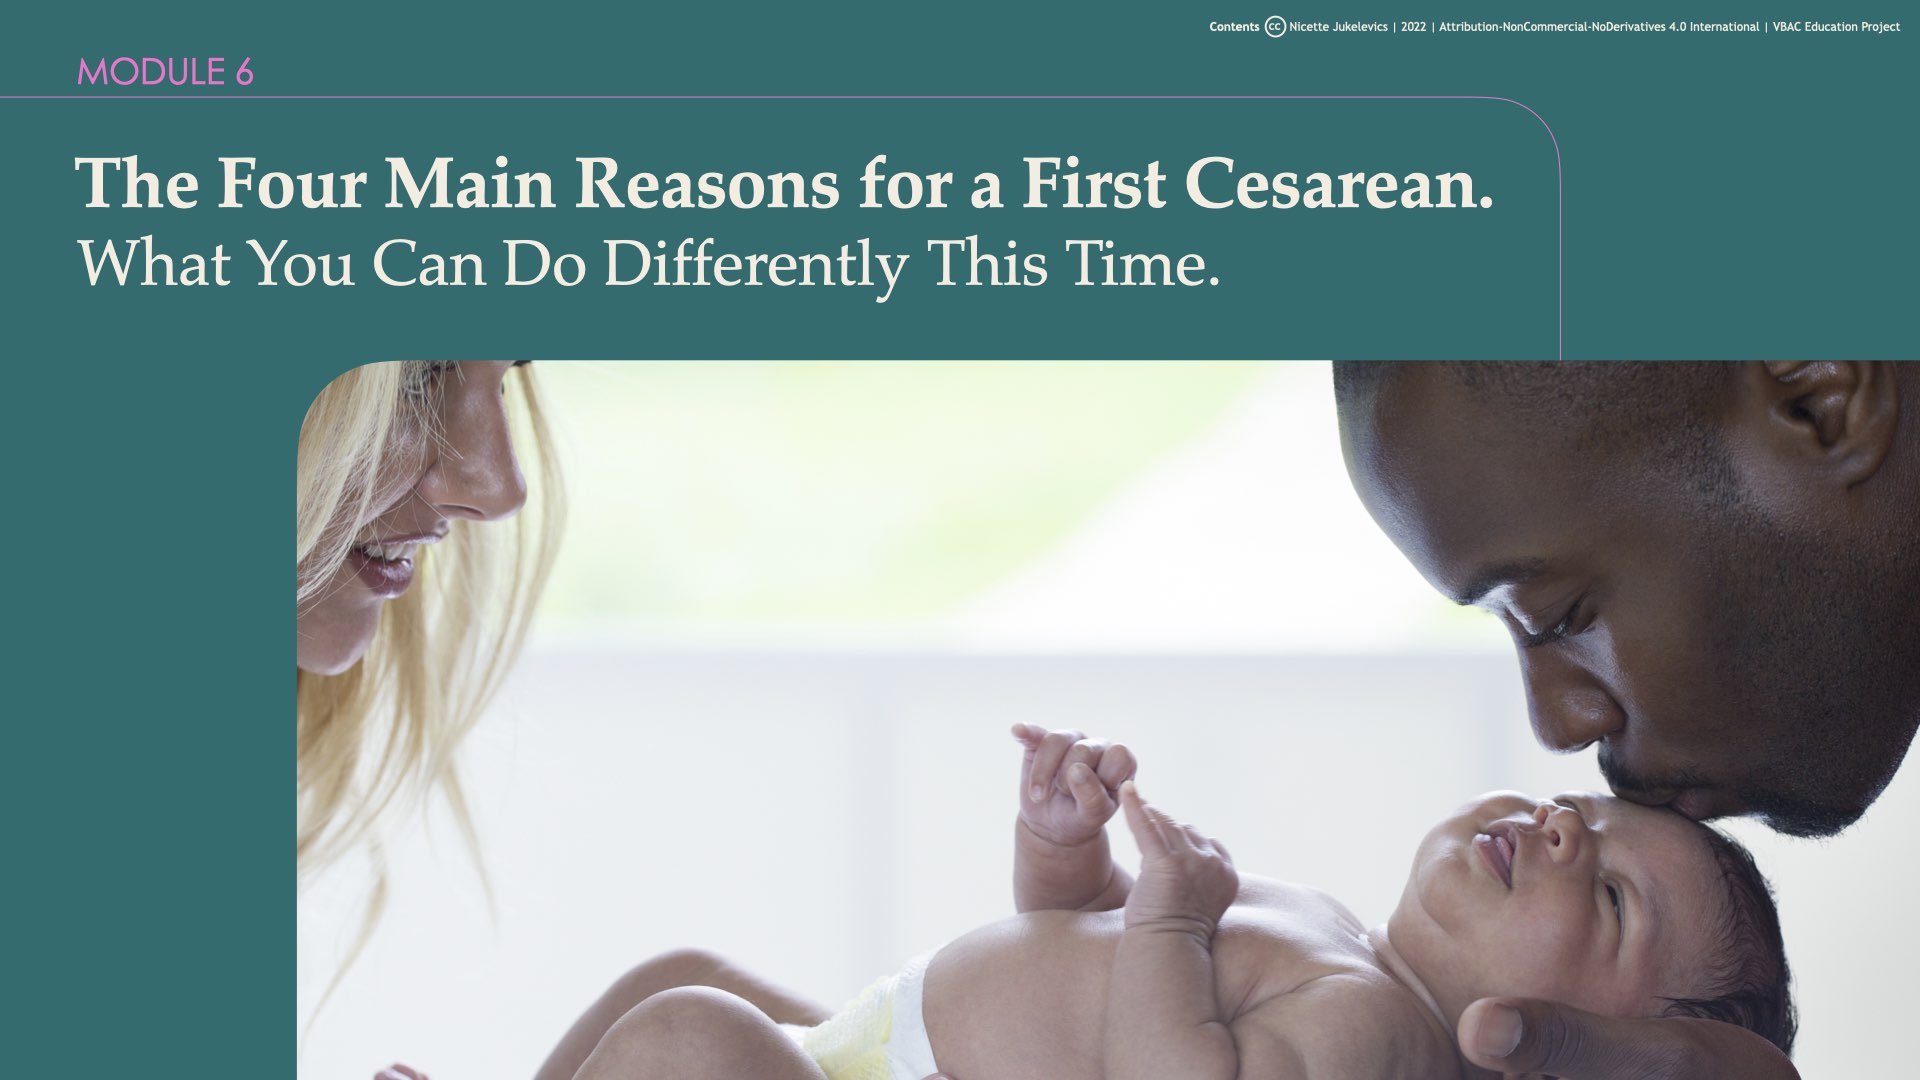 Module 6: The Four Main Reasons for a First Cesarean. What You Can Do Differently This Time.